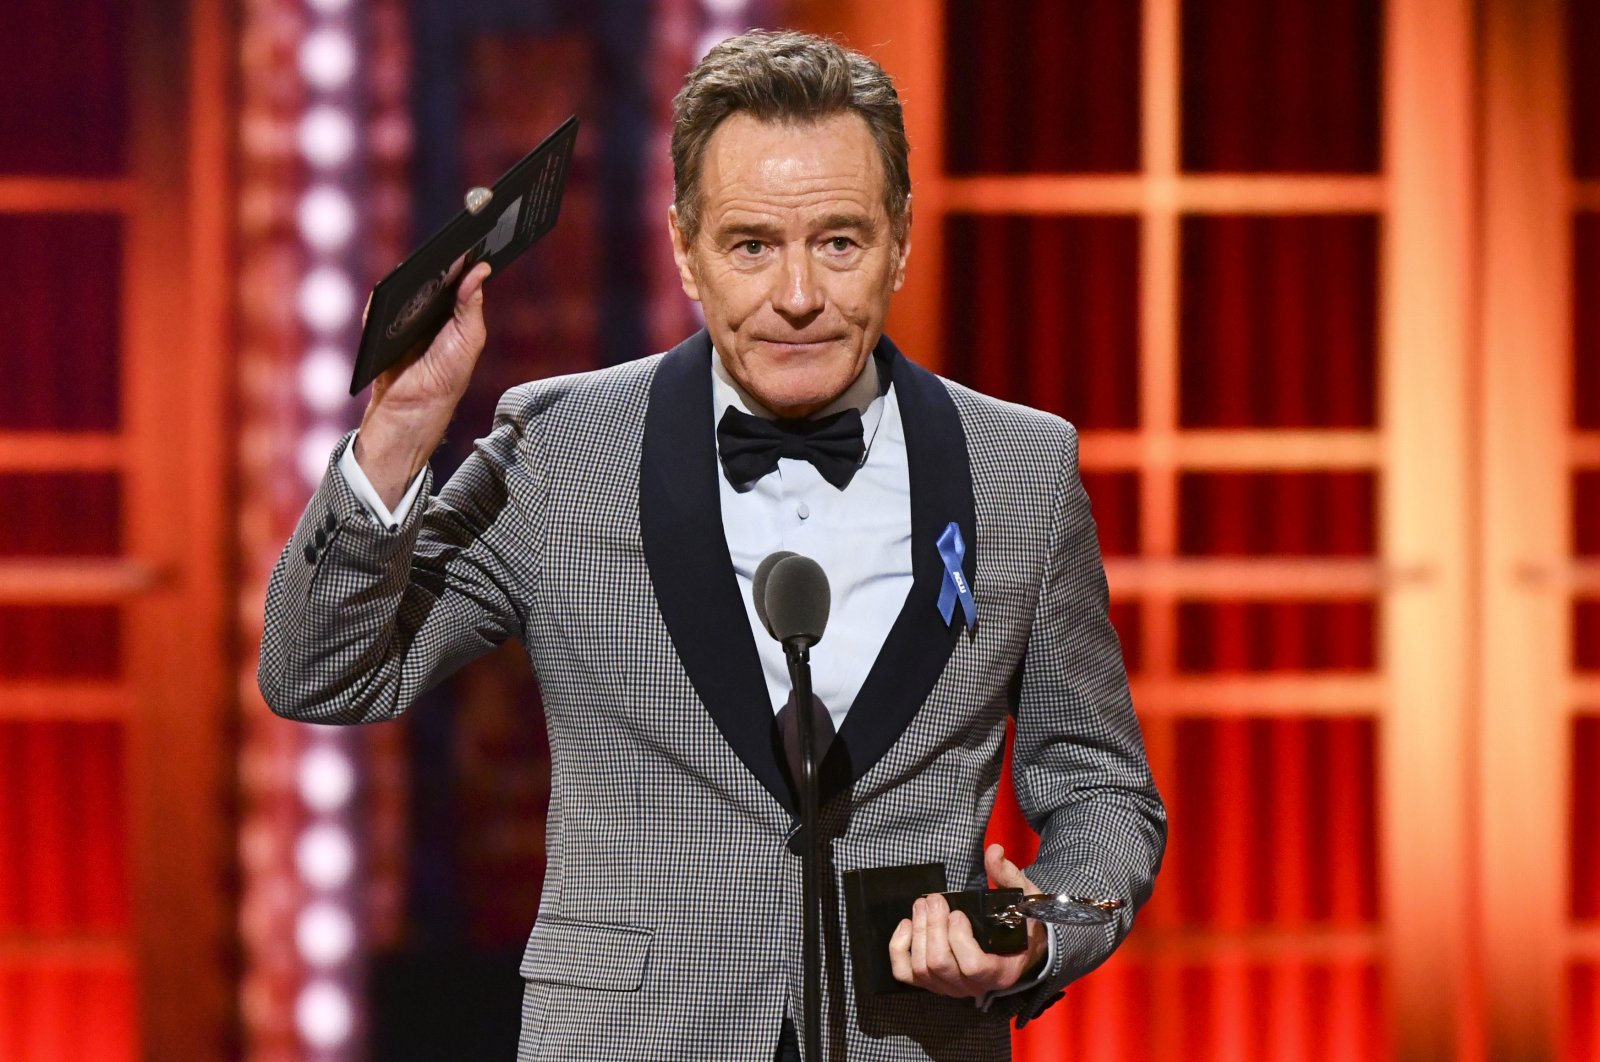 Bryan Cranston during the 73rd annual Tony Awards in New York, U.S., June 9, 2019. (AP Photo)